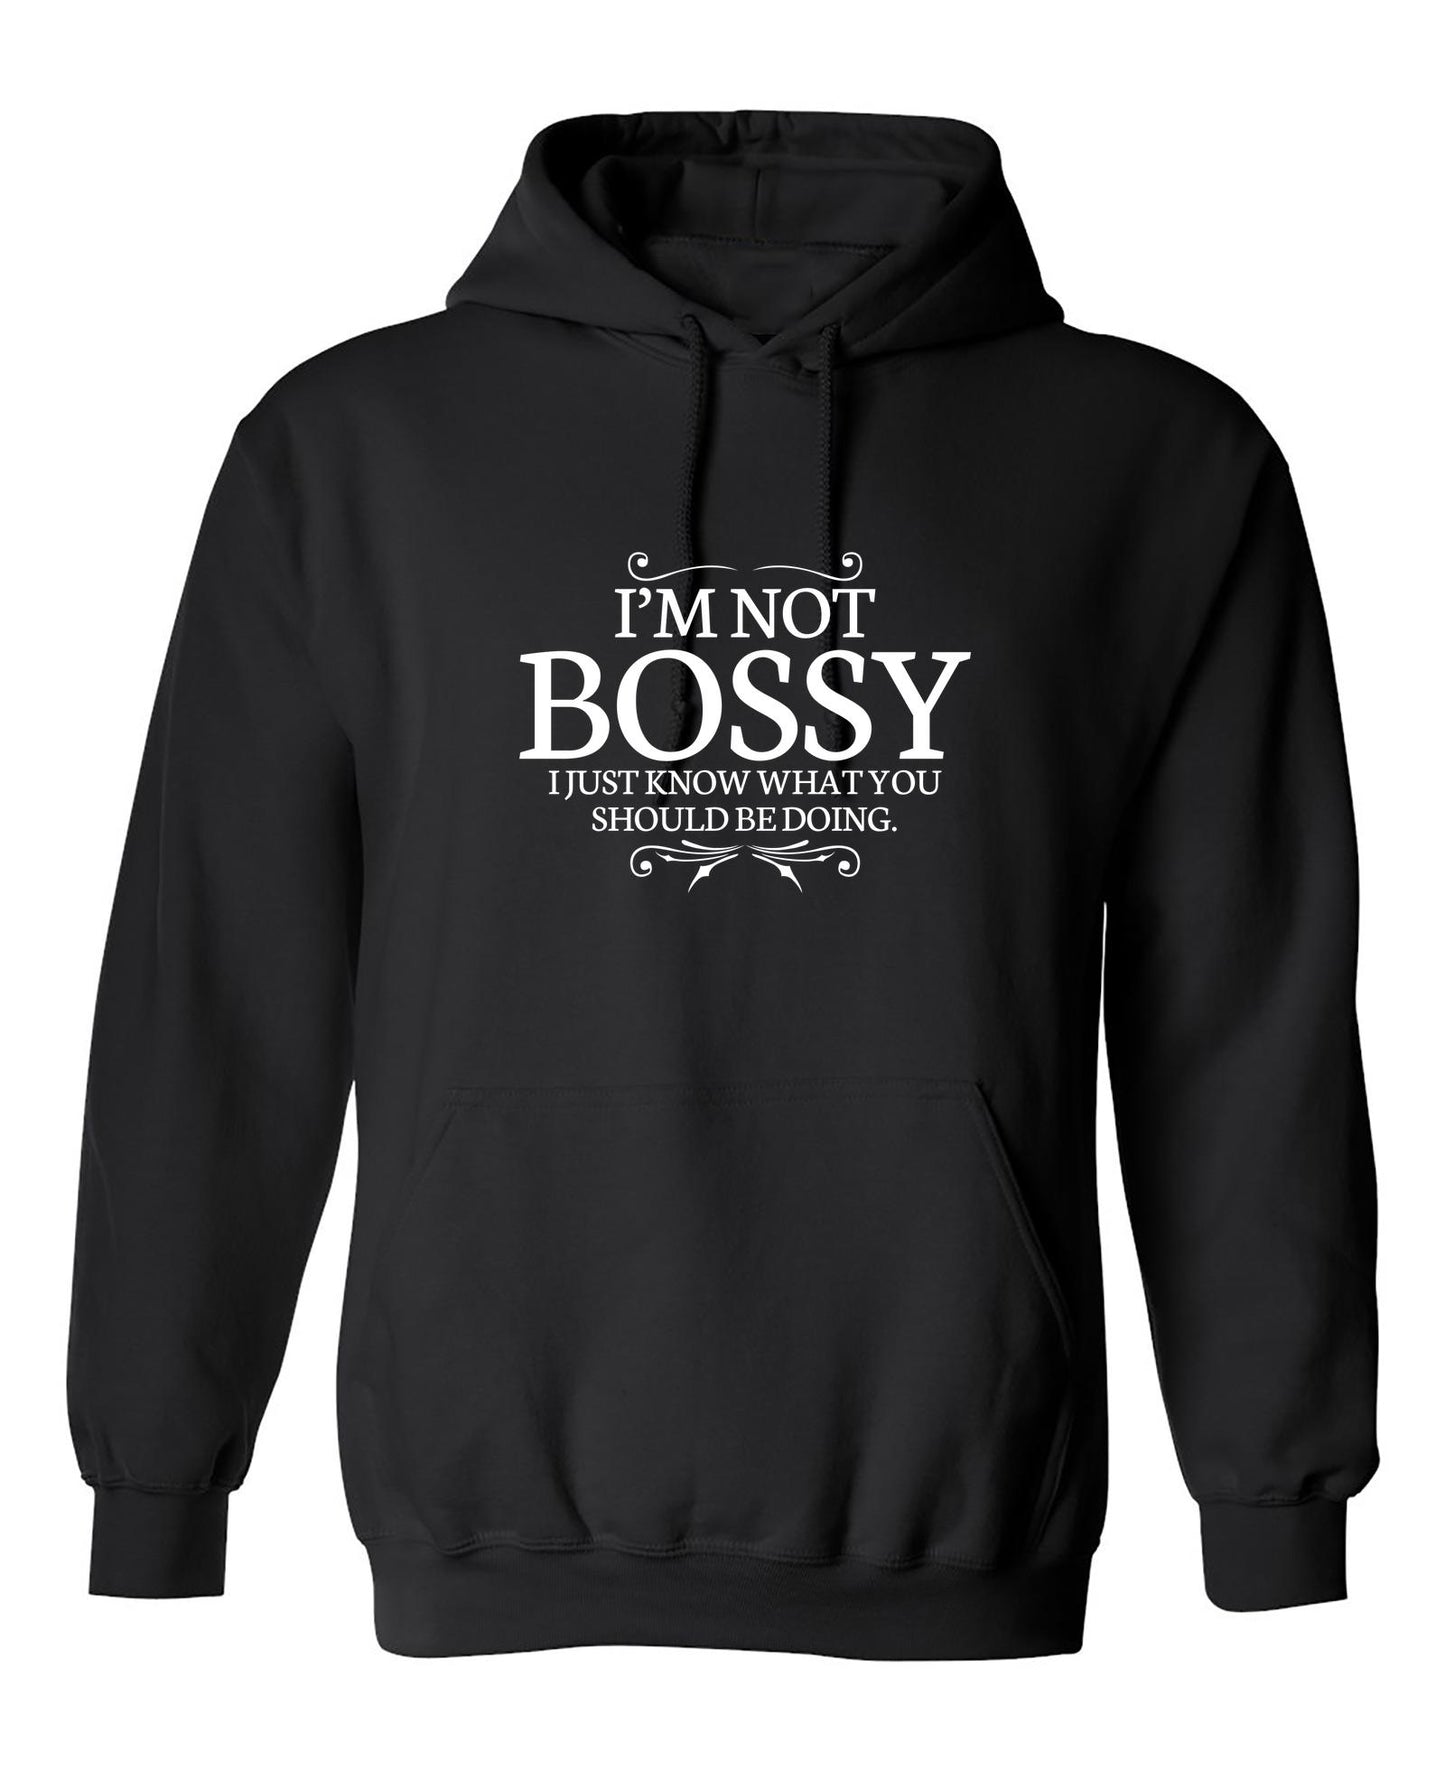 Funny T-Shirts design "I'm Not Bossy I Just Know What You Should Be Doing"